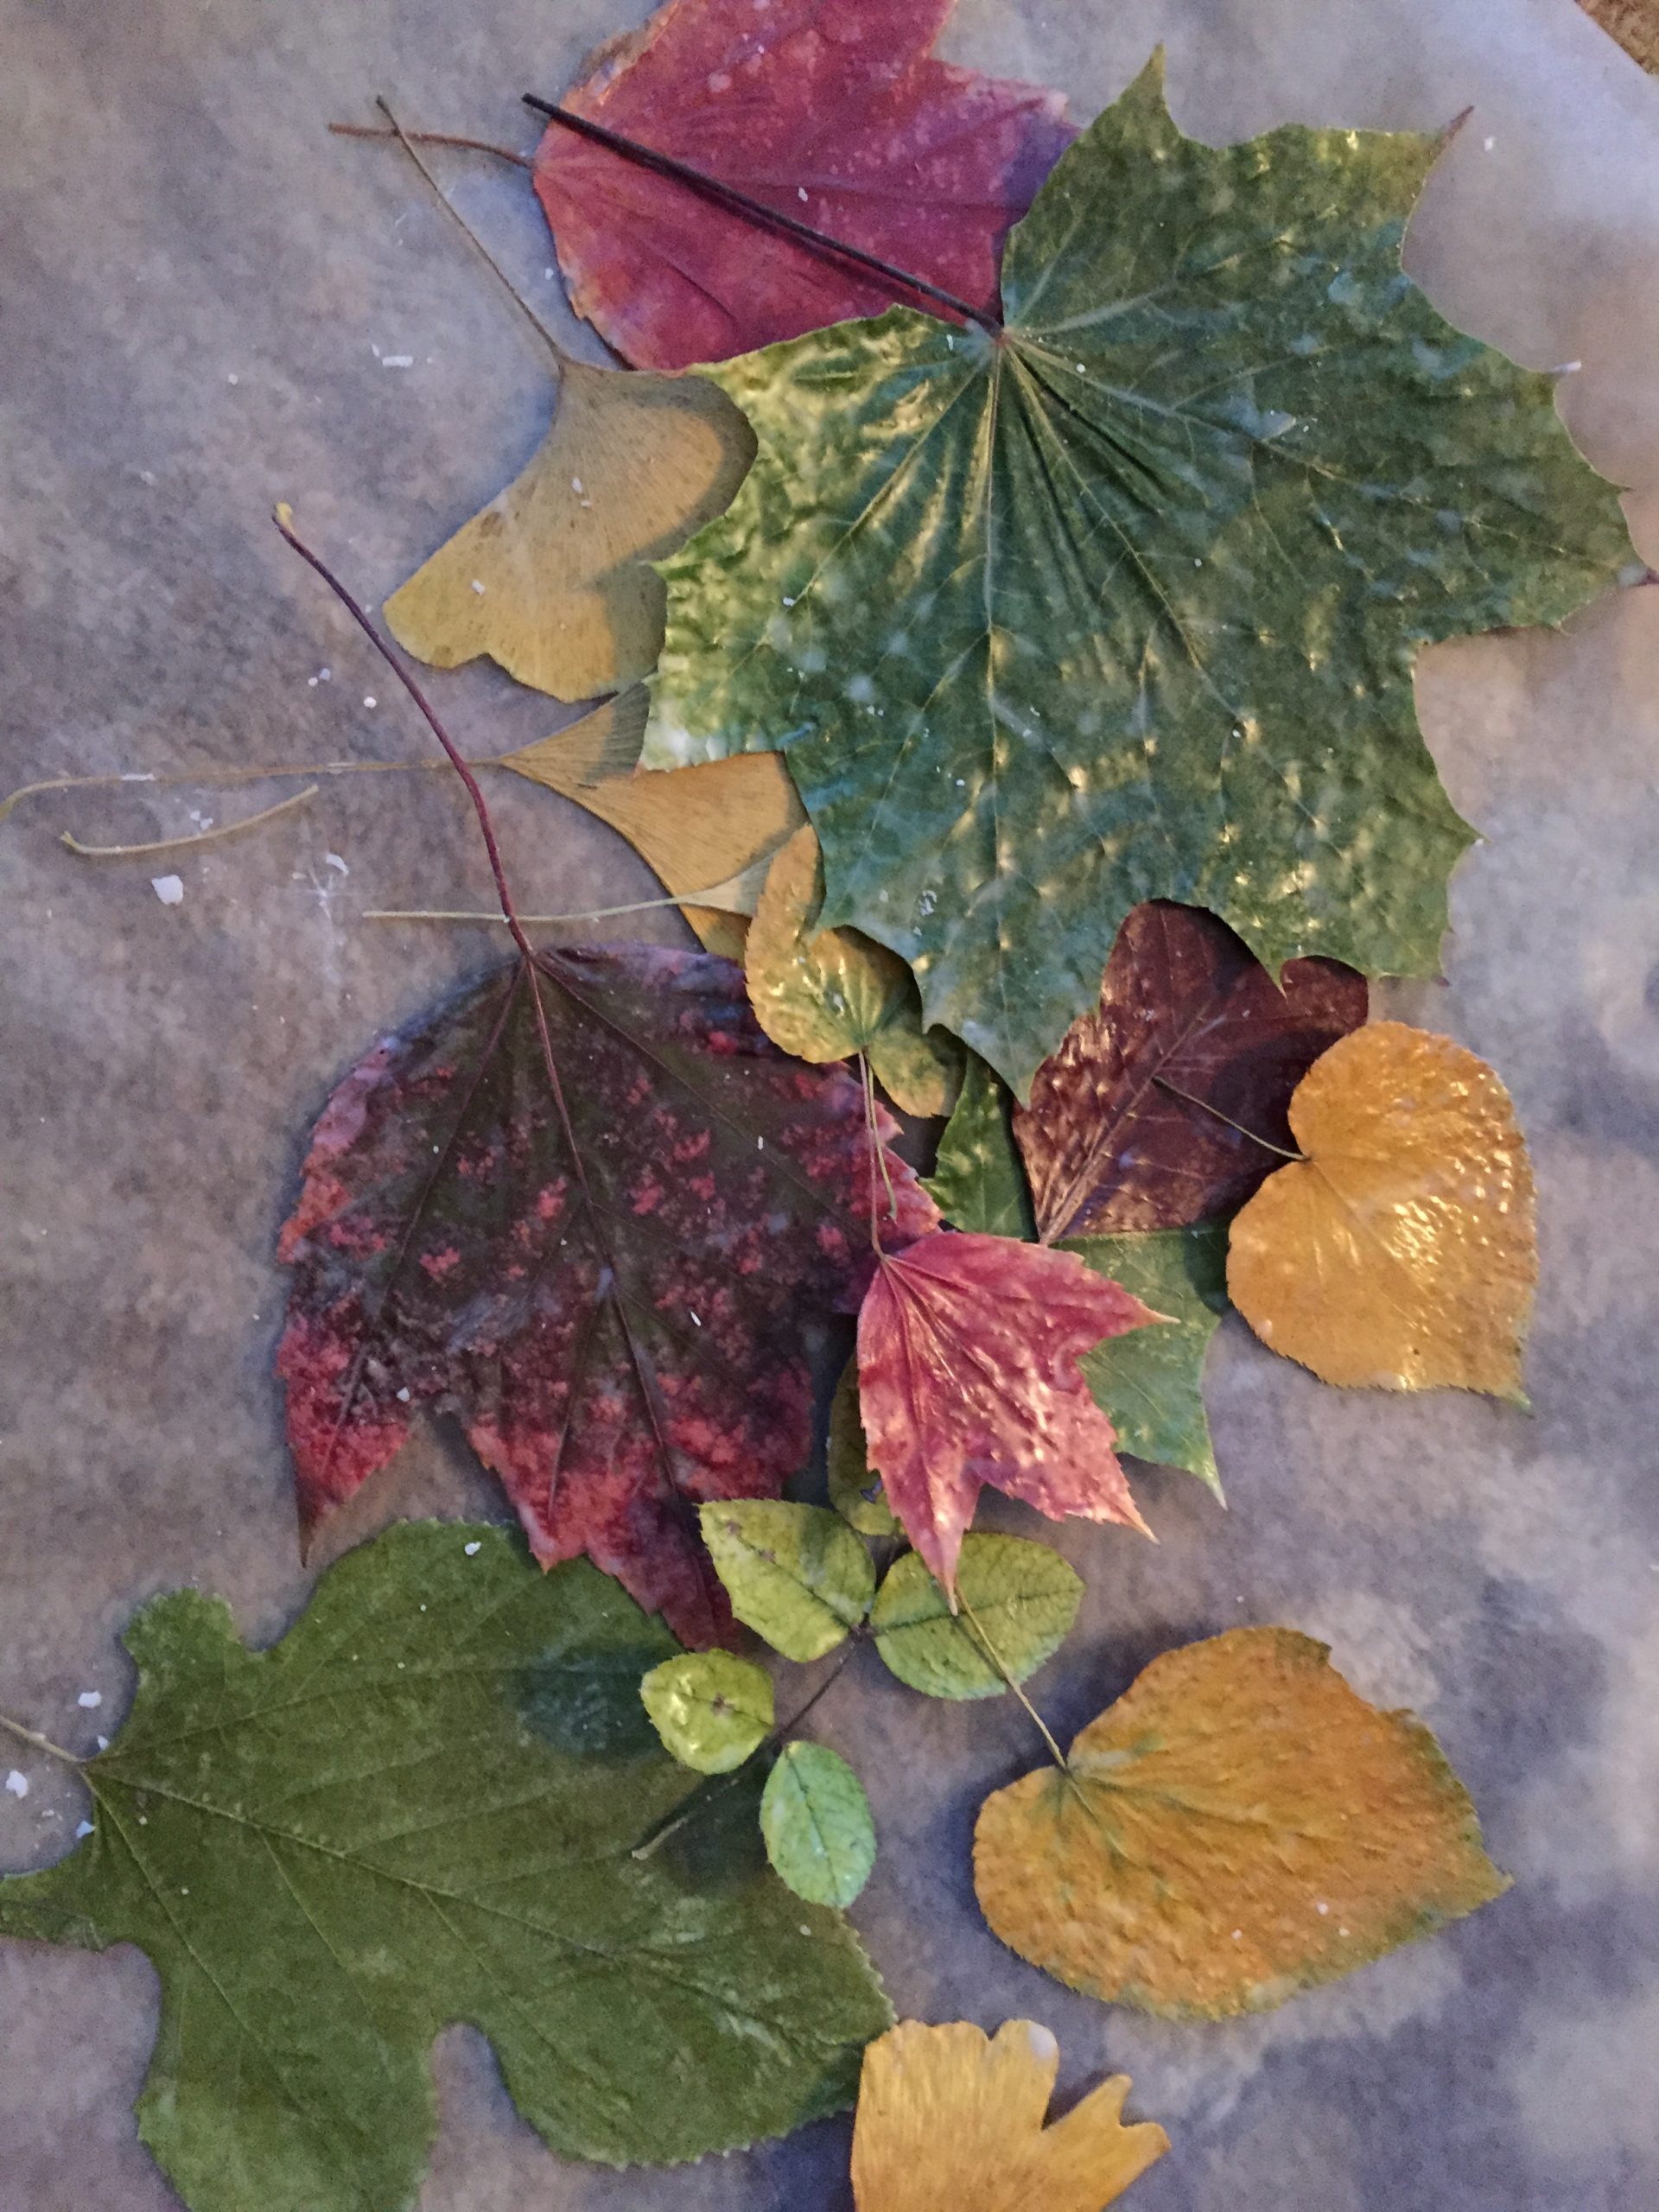 DIY Project: Turn Leaves into Wall Art